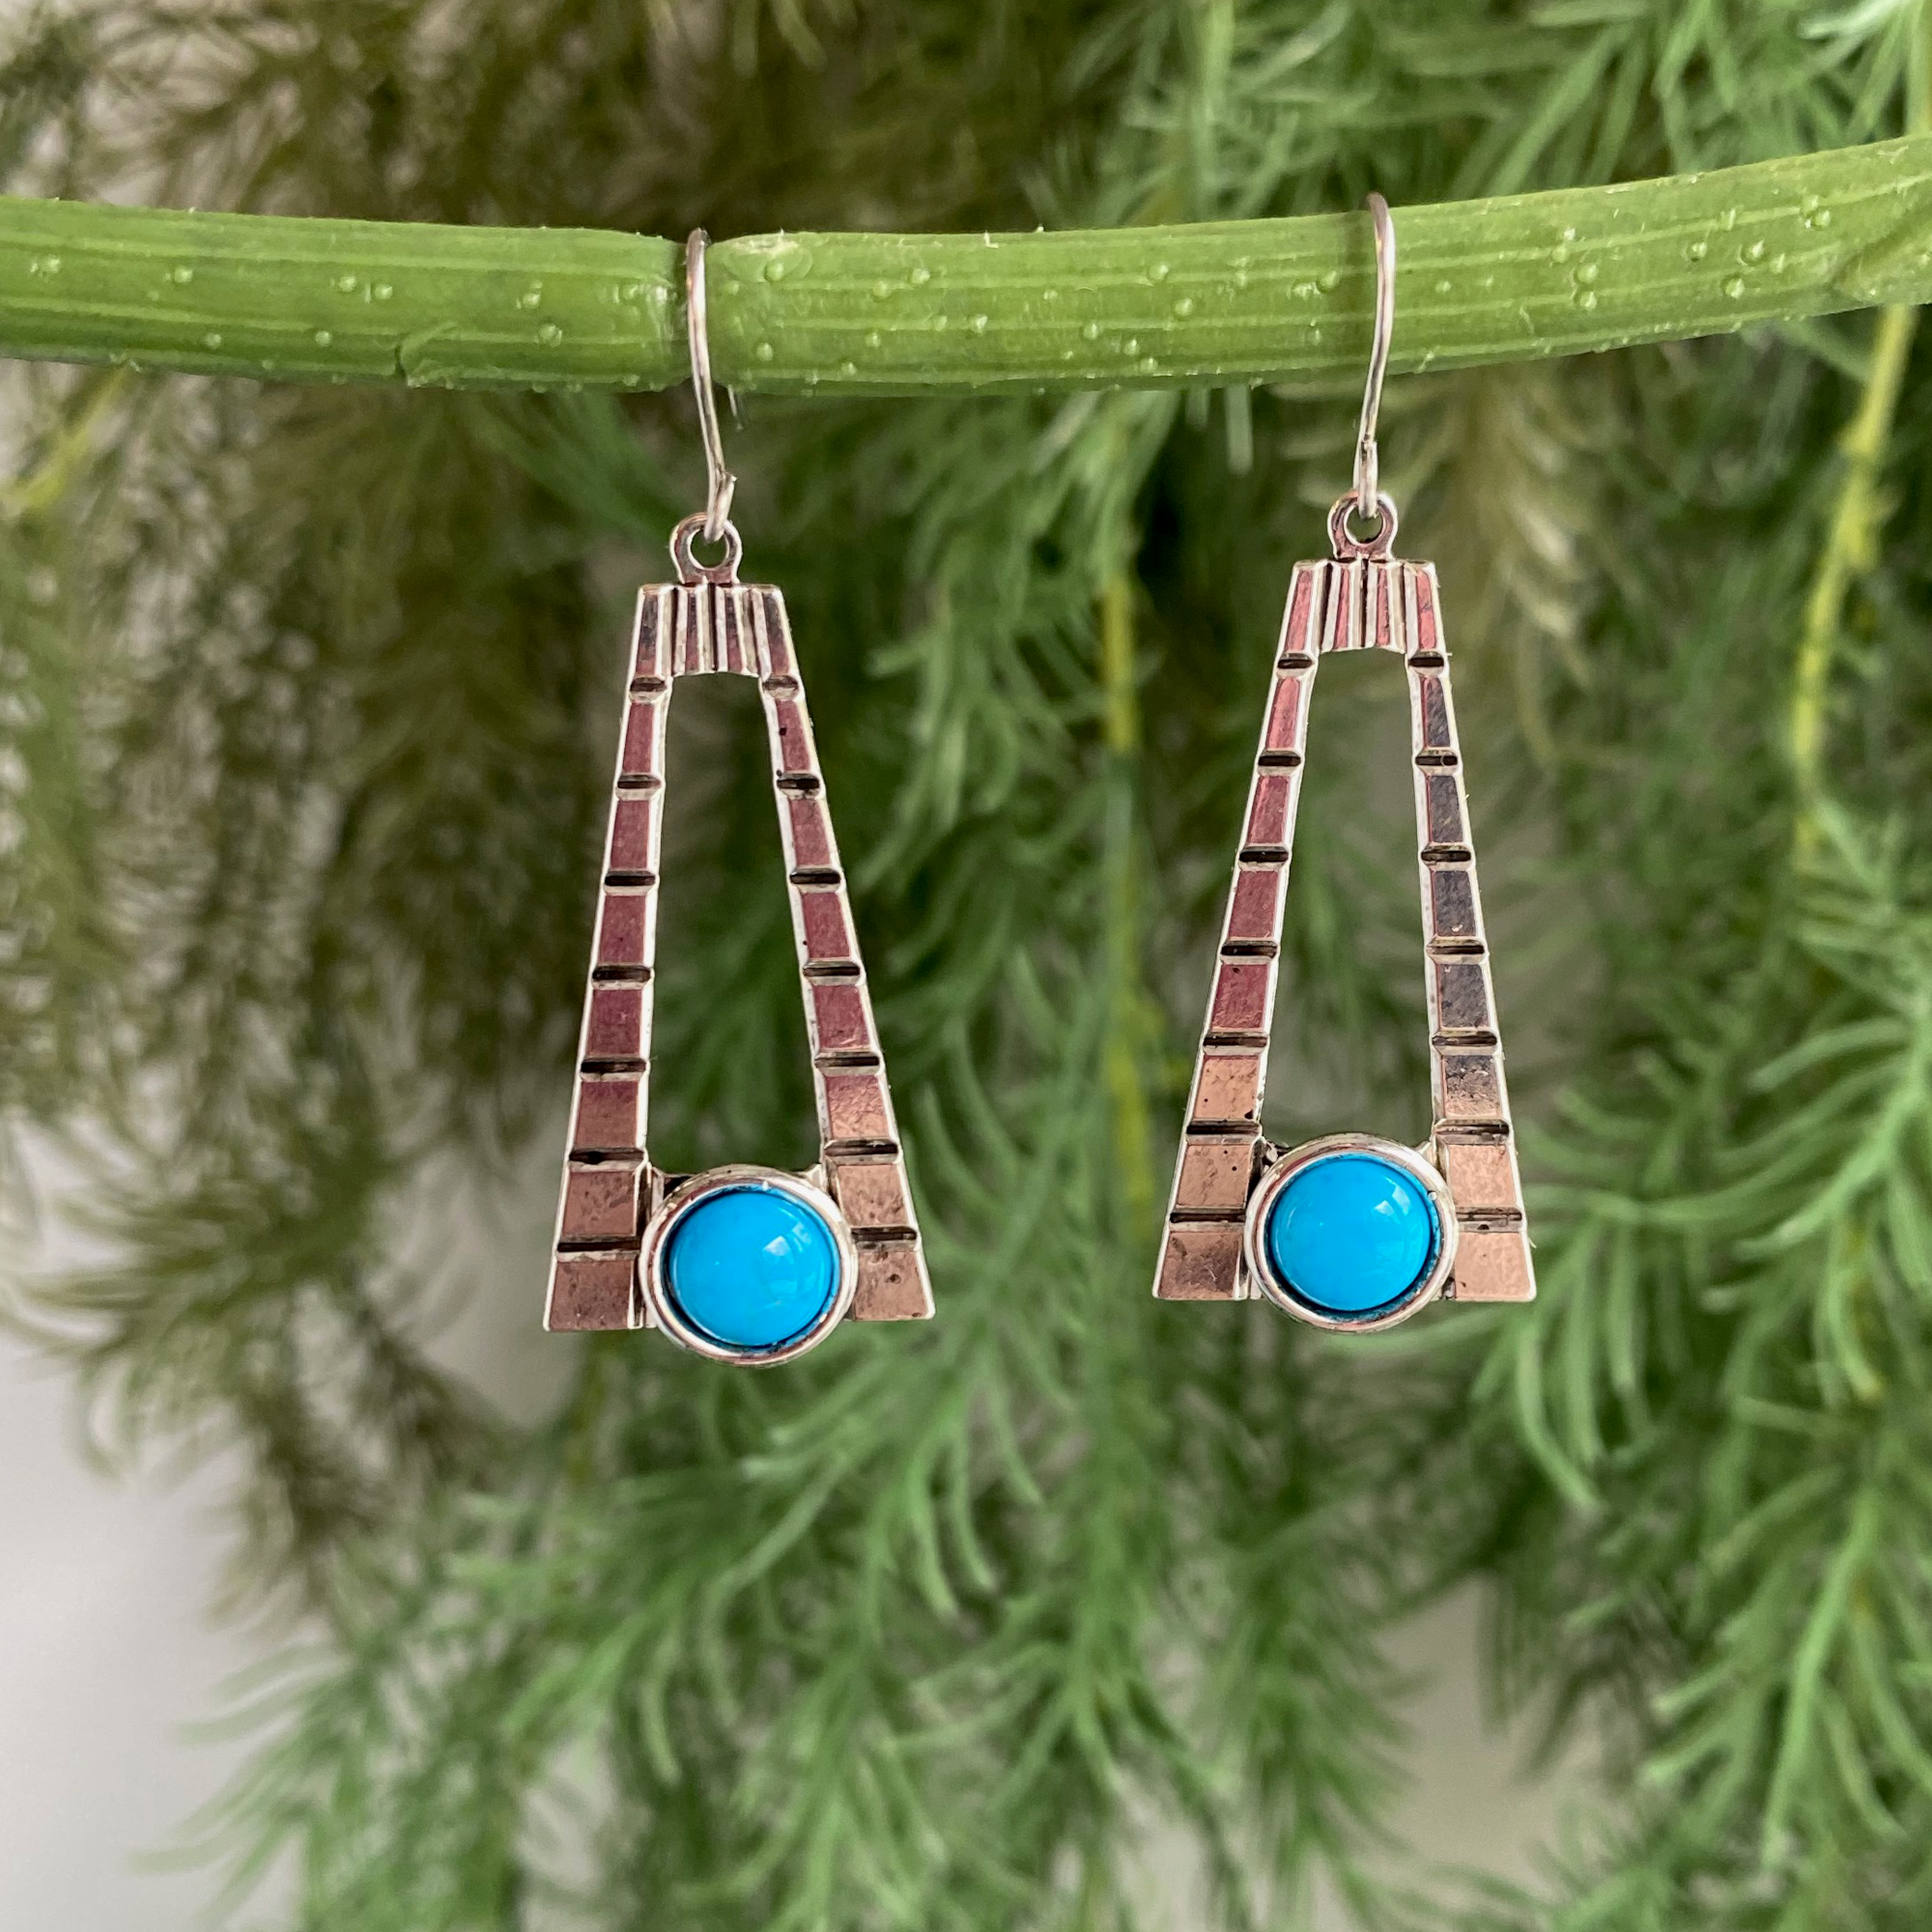 Incognito Earrings